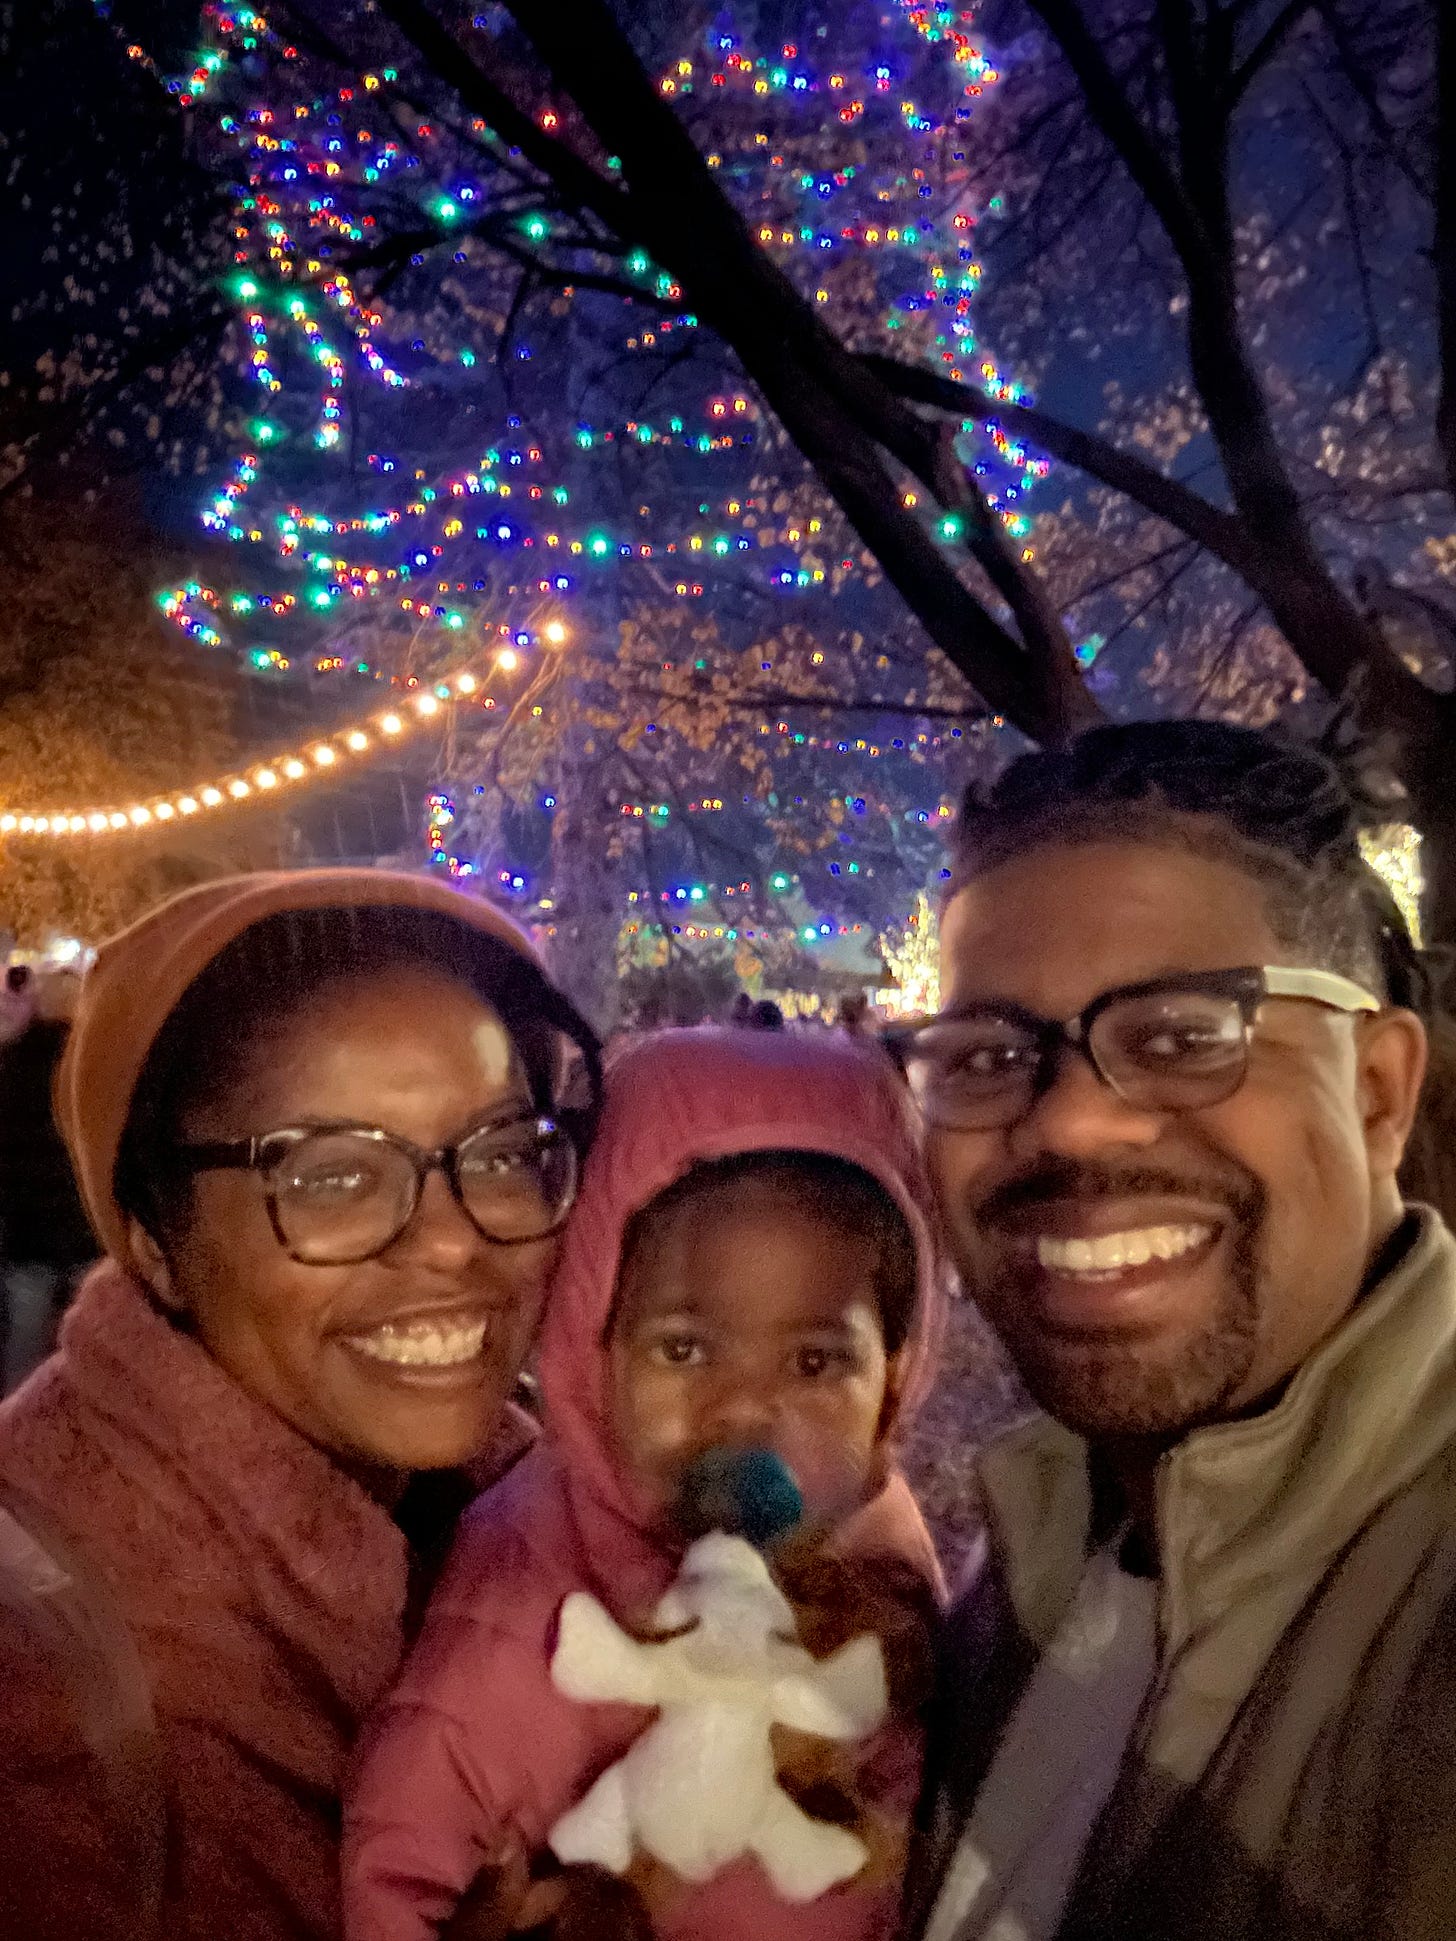 A picture of a Black family in front of a brightly colored tree.